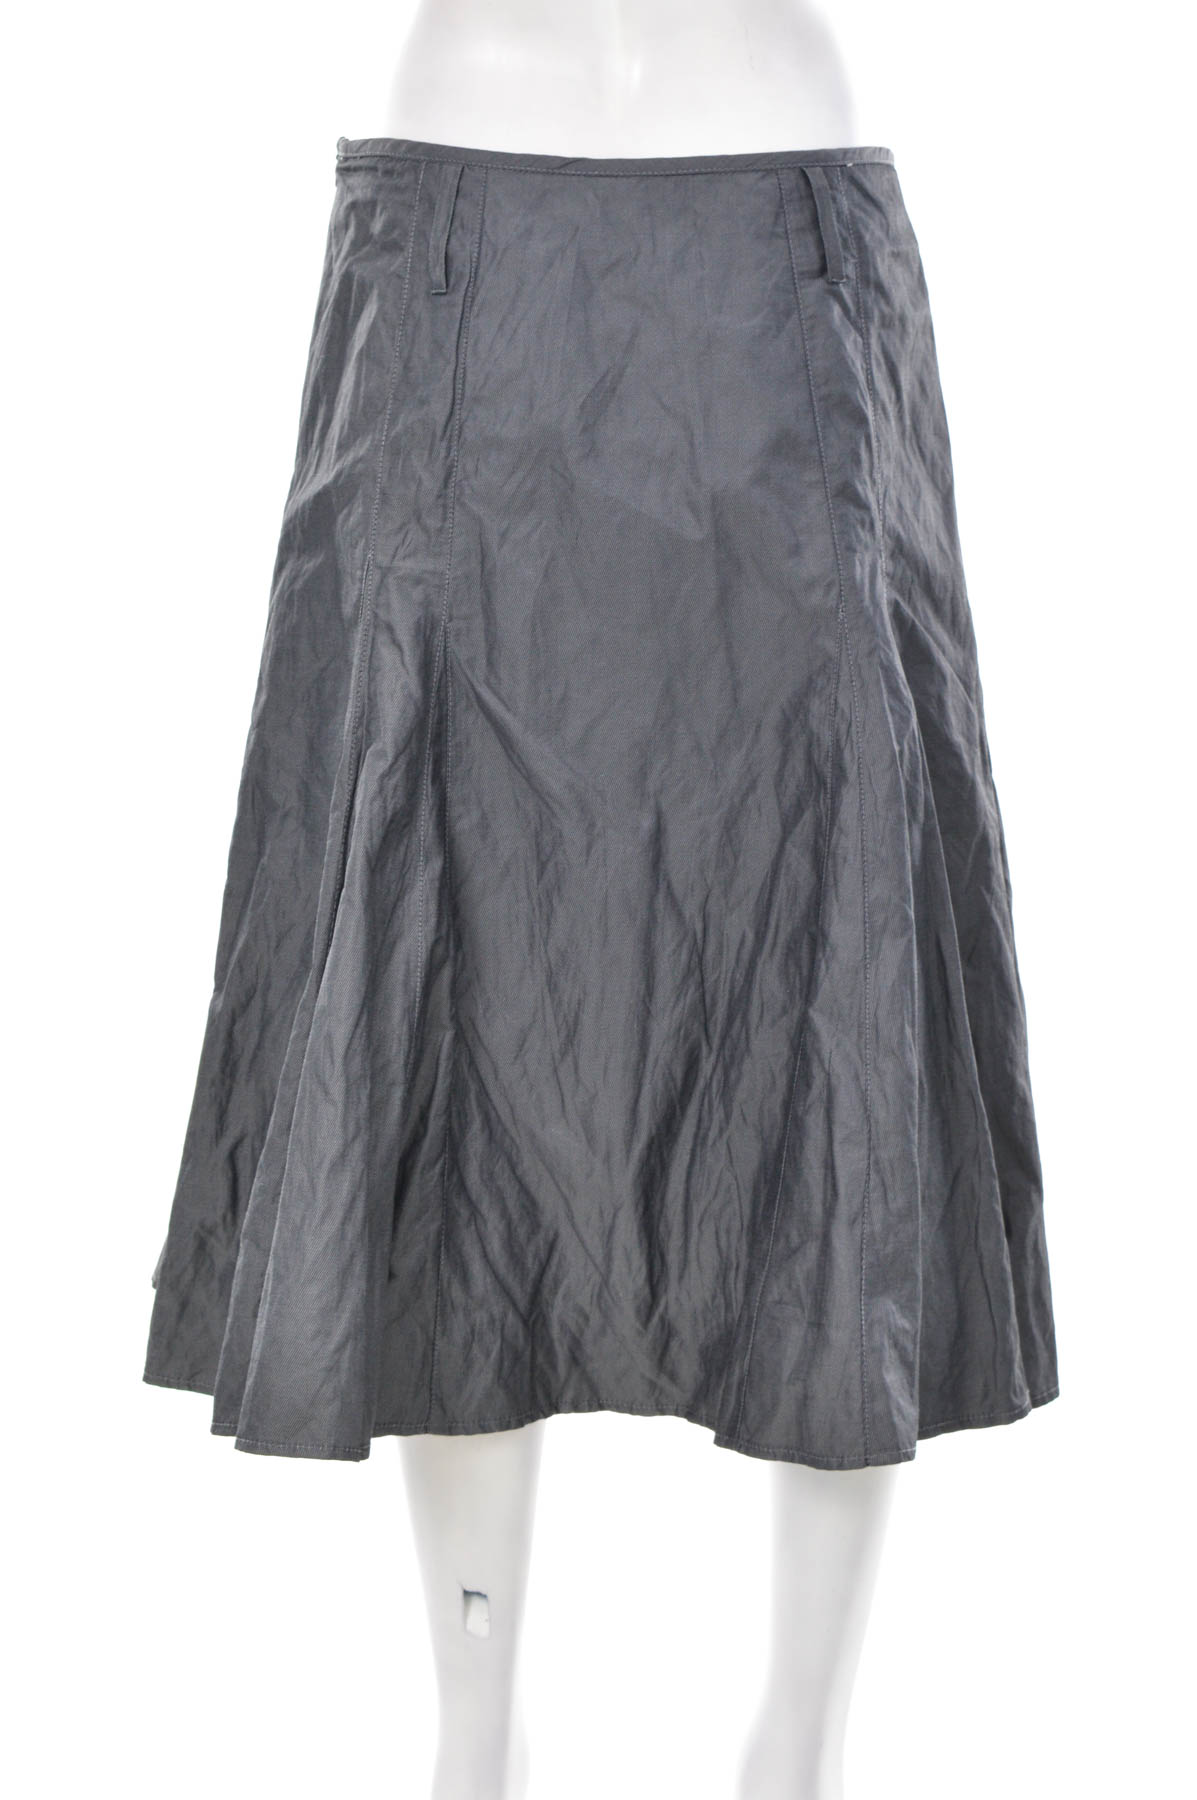 Skirt with a wrinkled effect - Franco Callegari - 1